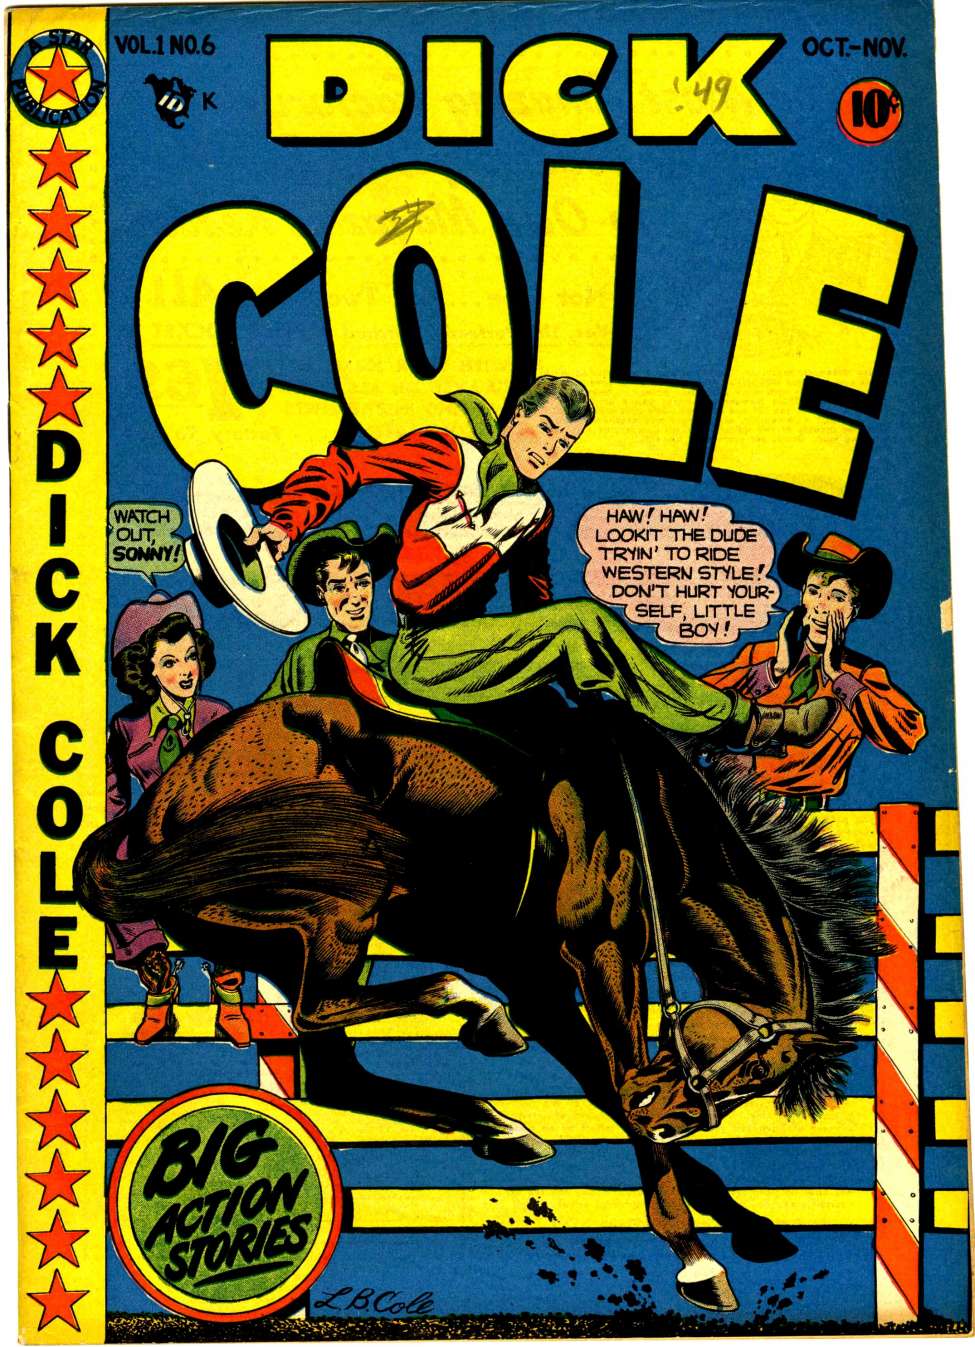 Comic Book Cover For Dick Cole 7 (alt)